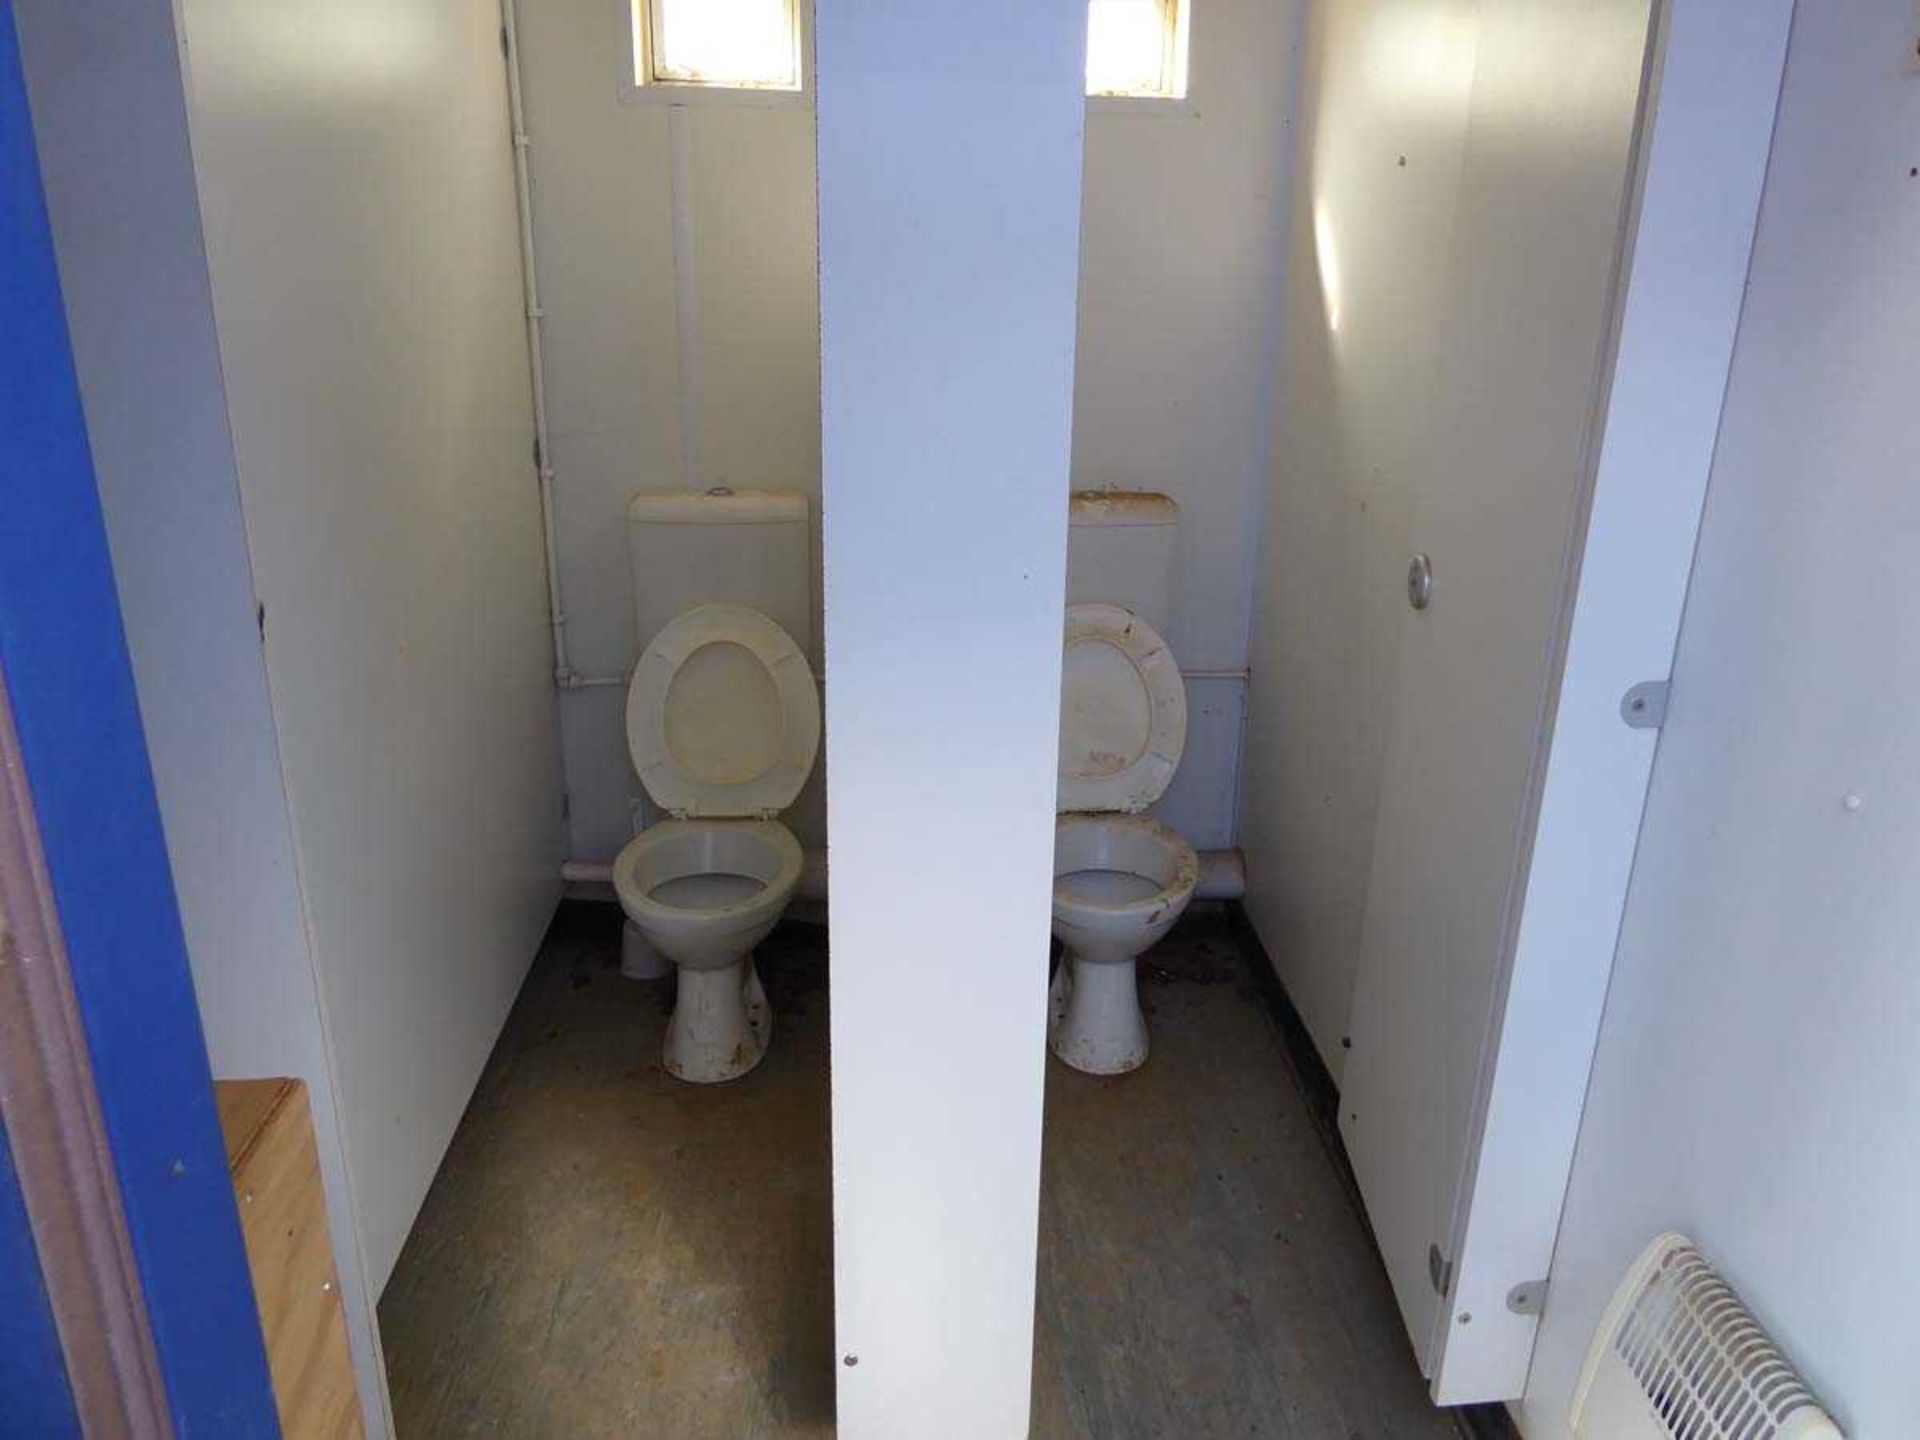 12ft x 9ft toilet block in corrugated steel toilet block in corrugated steel with men's 2 cubicle/ - Image 5 of 5